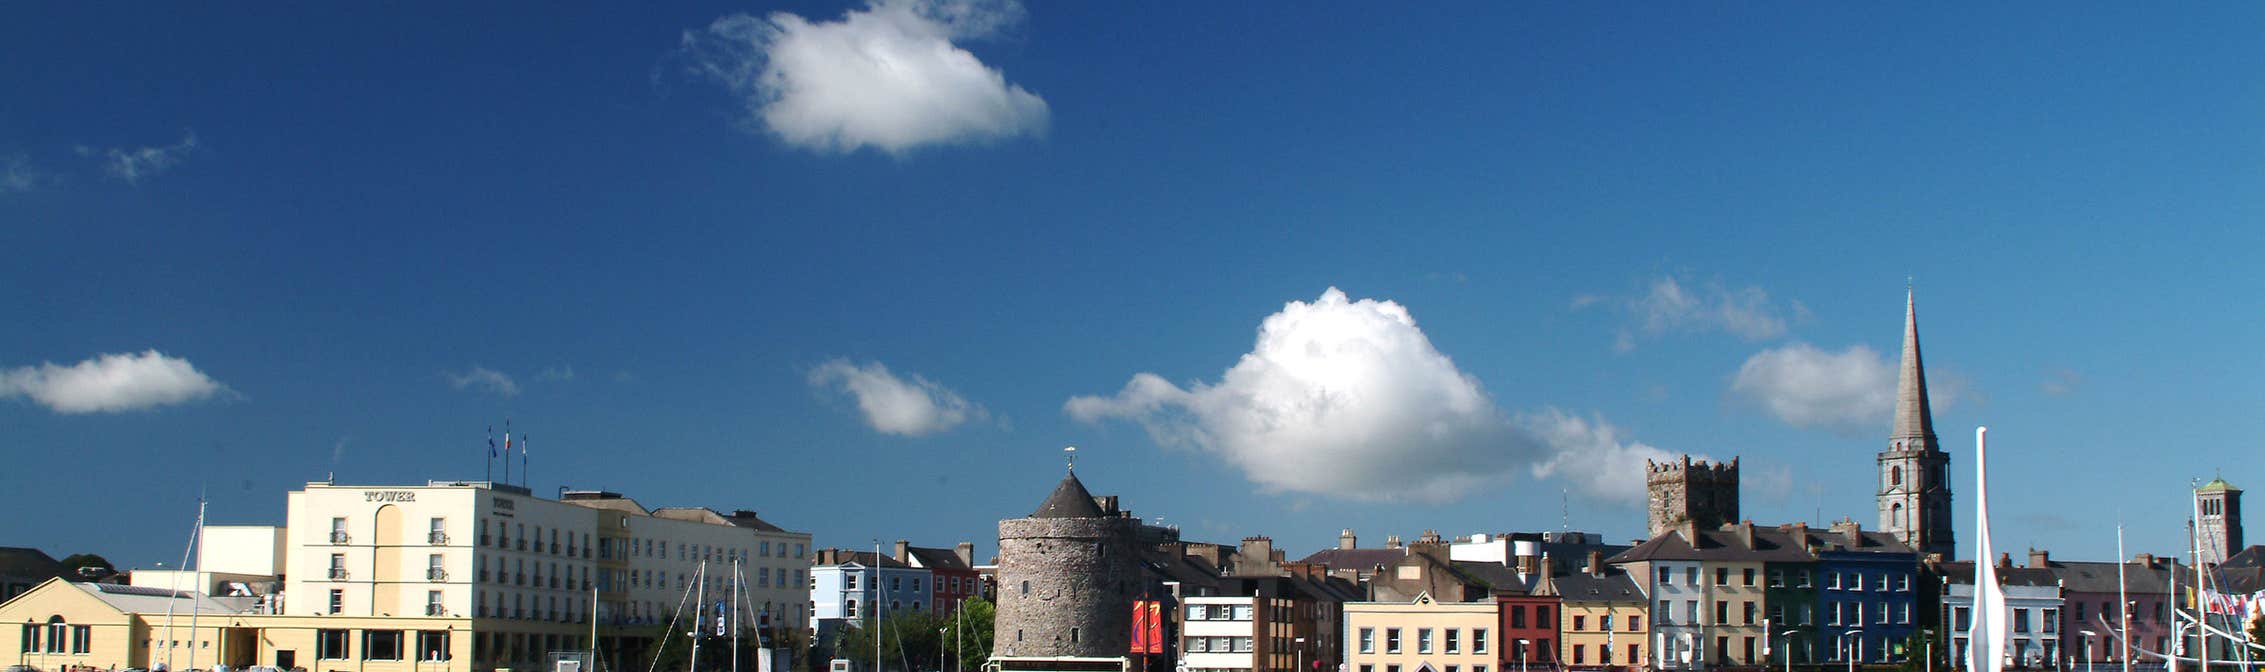 View Of Waterford Quay in Waterford City on a sunny day with buildings in the background.